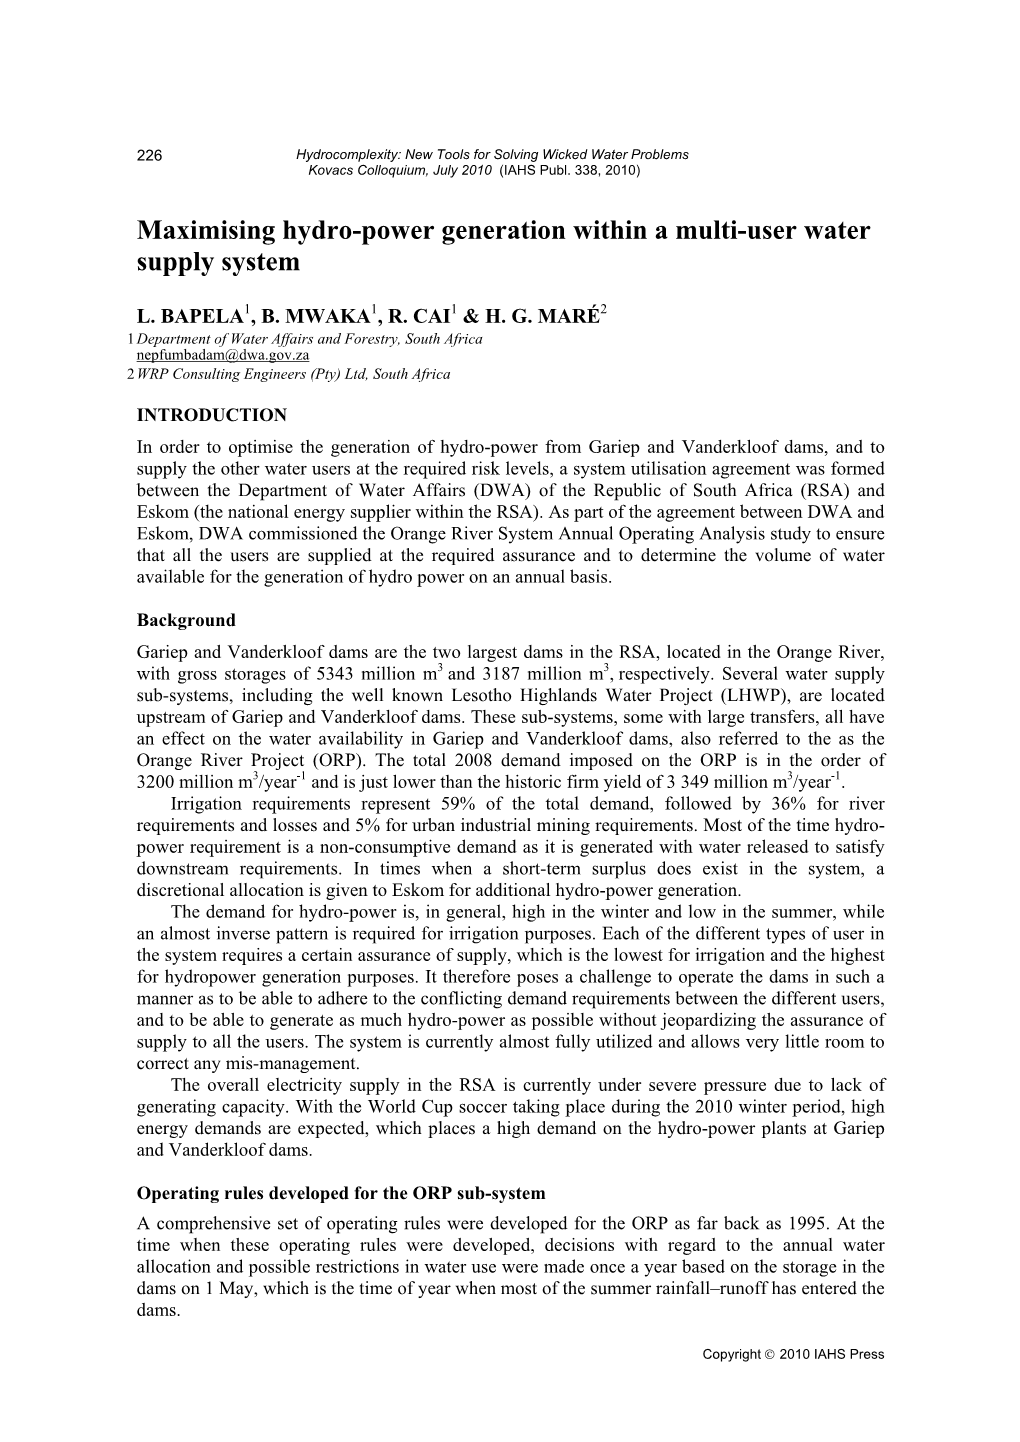 Maximising Hydro-Power Generation Within a Multi-User Water Supply System